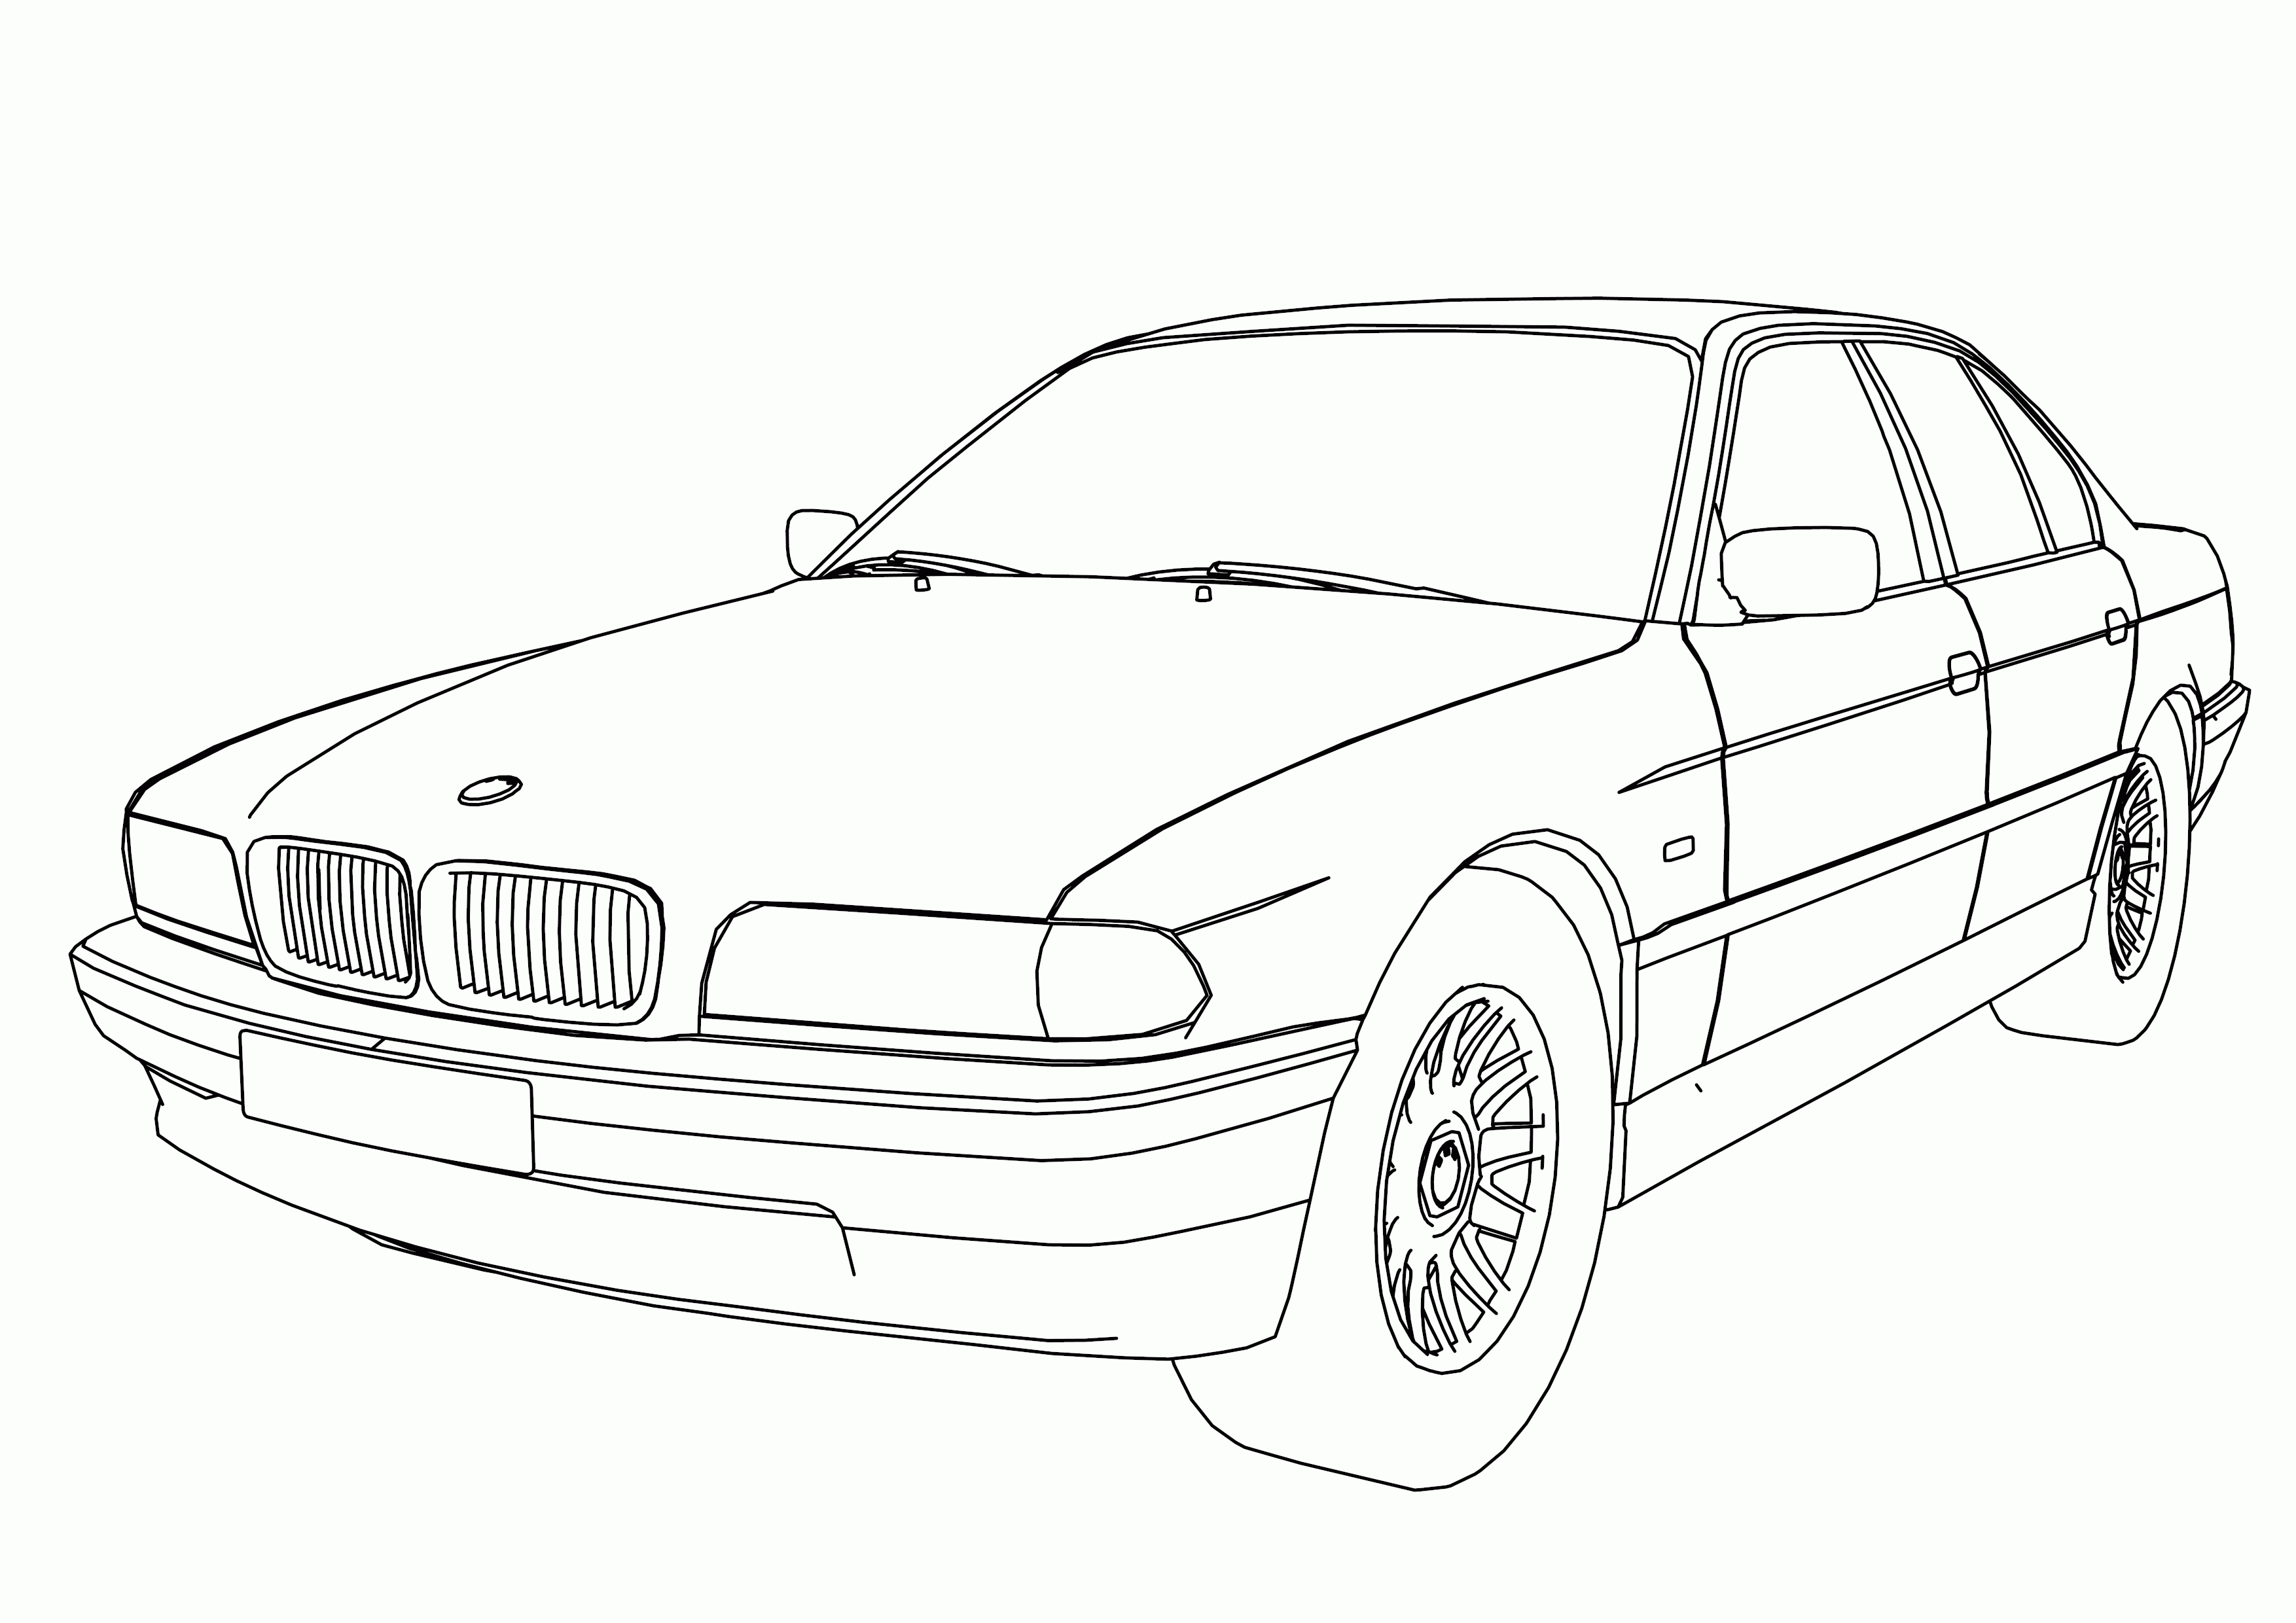 Bmw 750 Model Car Coloring Page | Wecoloringpage